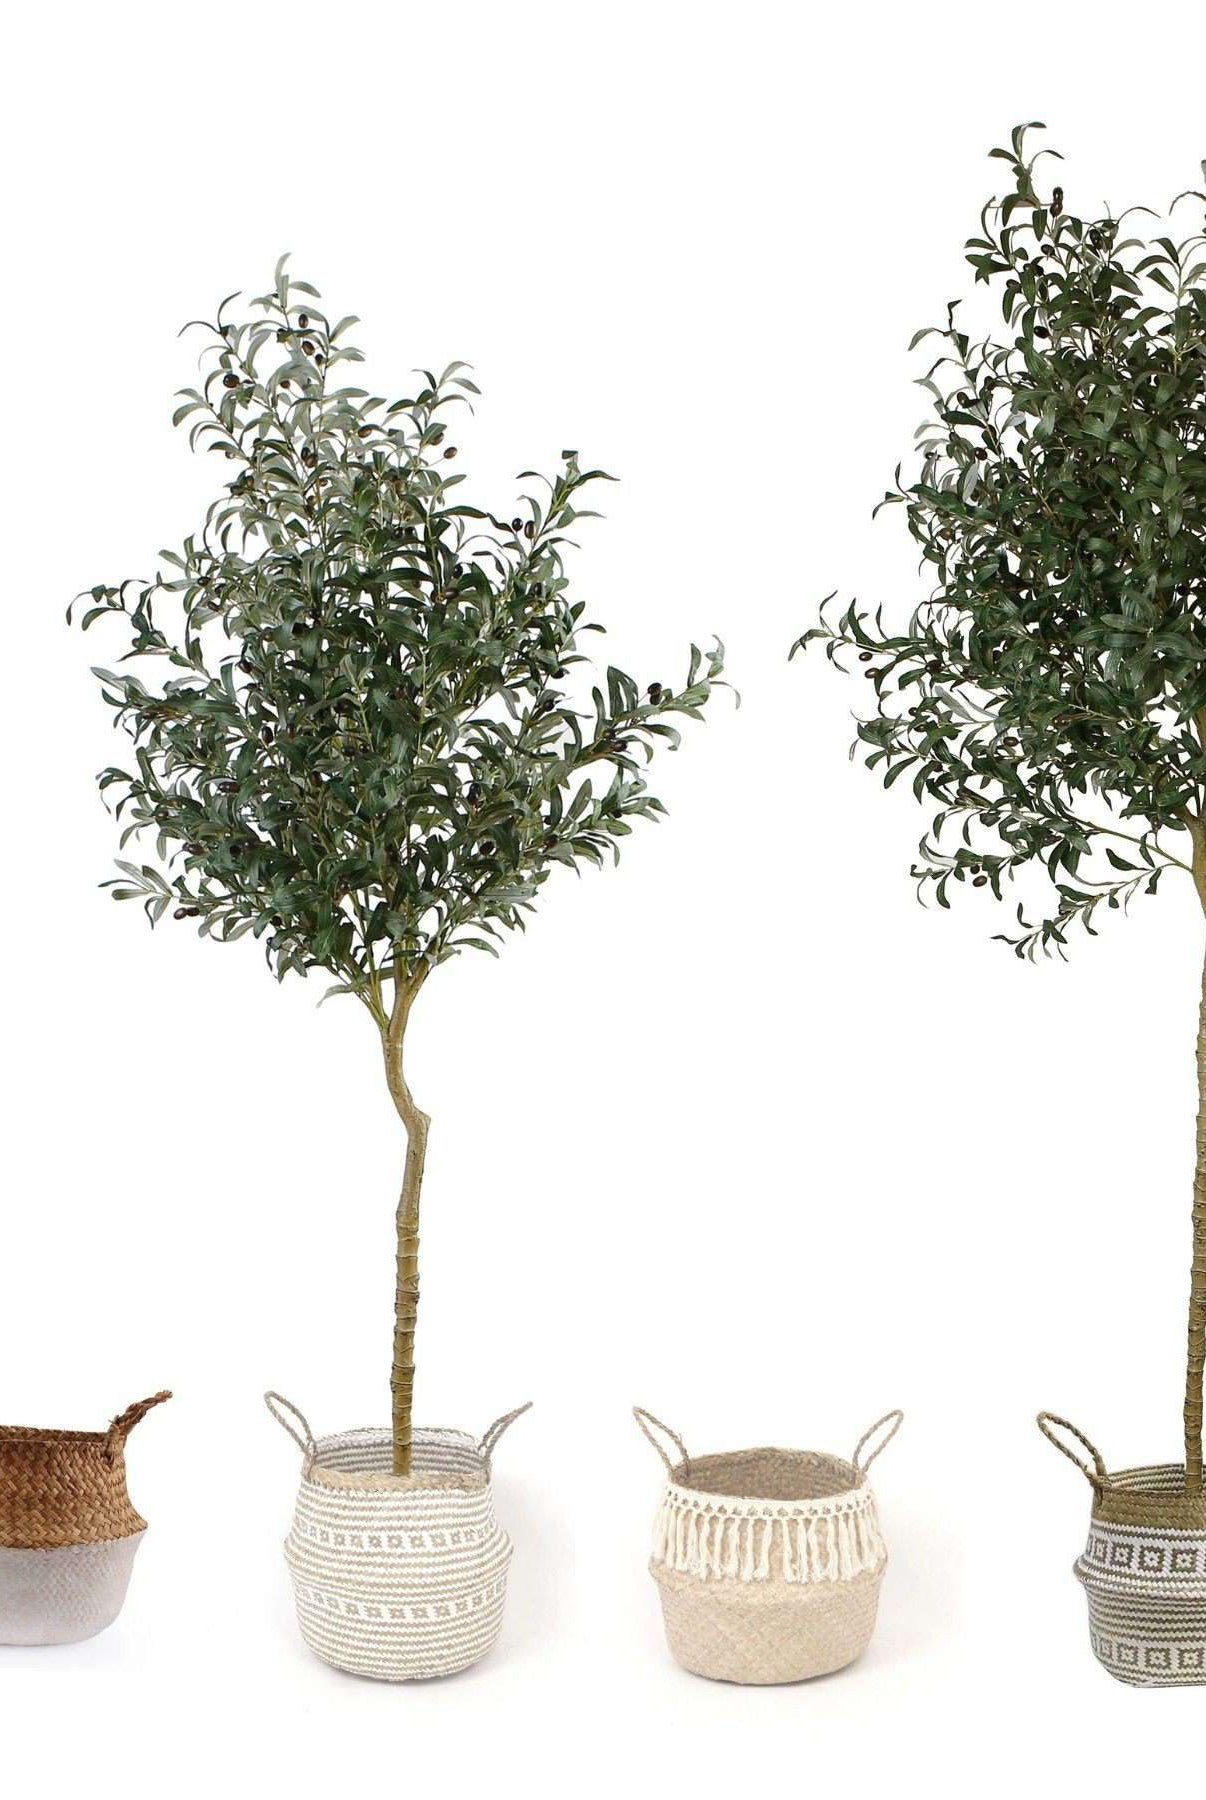 OLI ARTIFICIAL OLIVE TREE POTTED PLANT (Multiple Sizes) ArtiPlanto